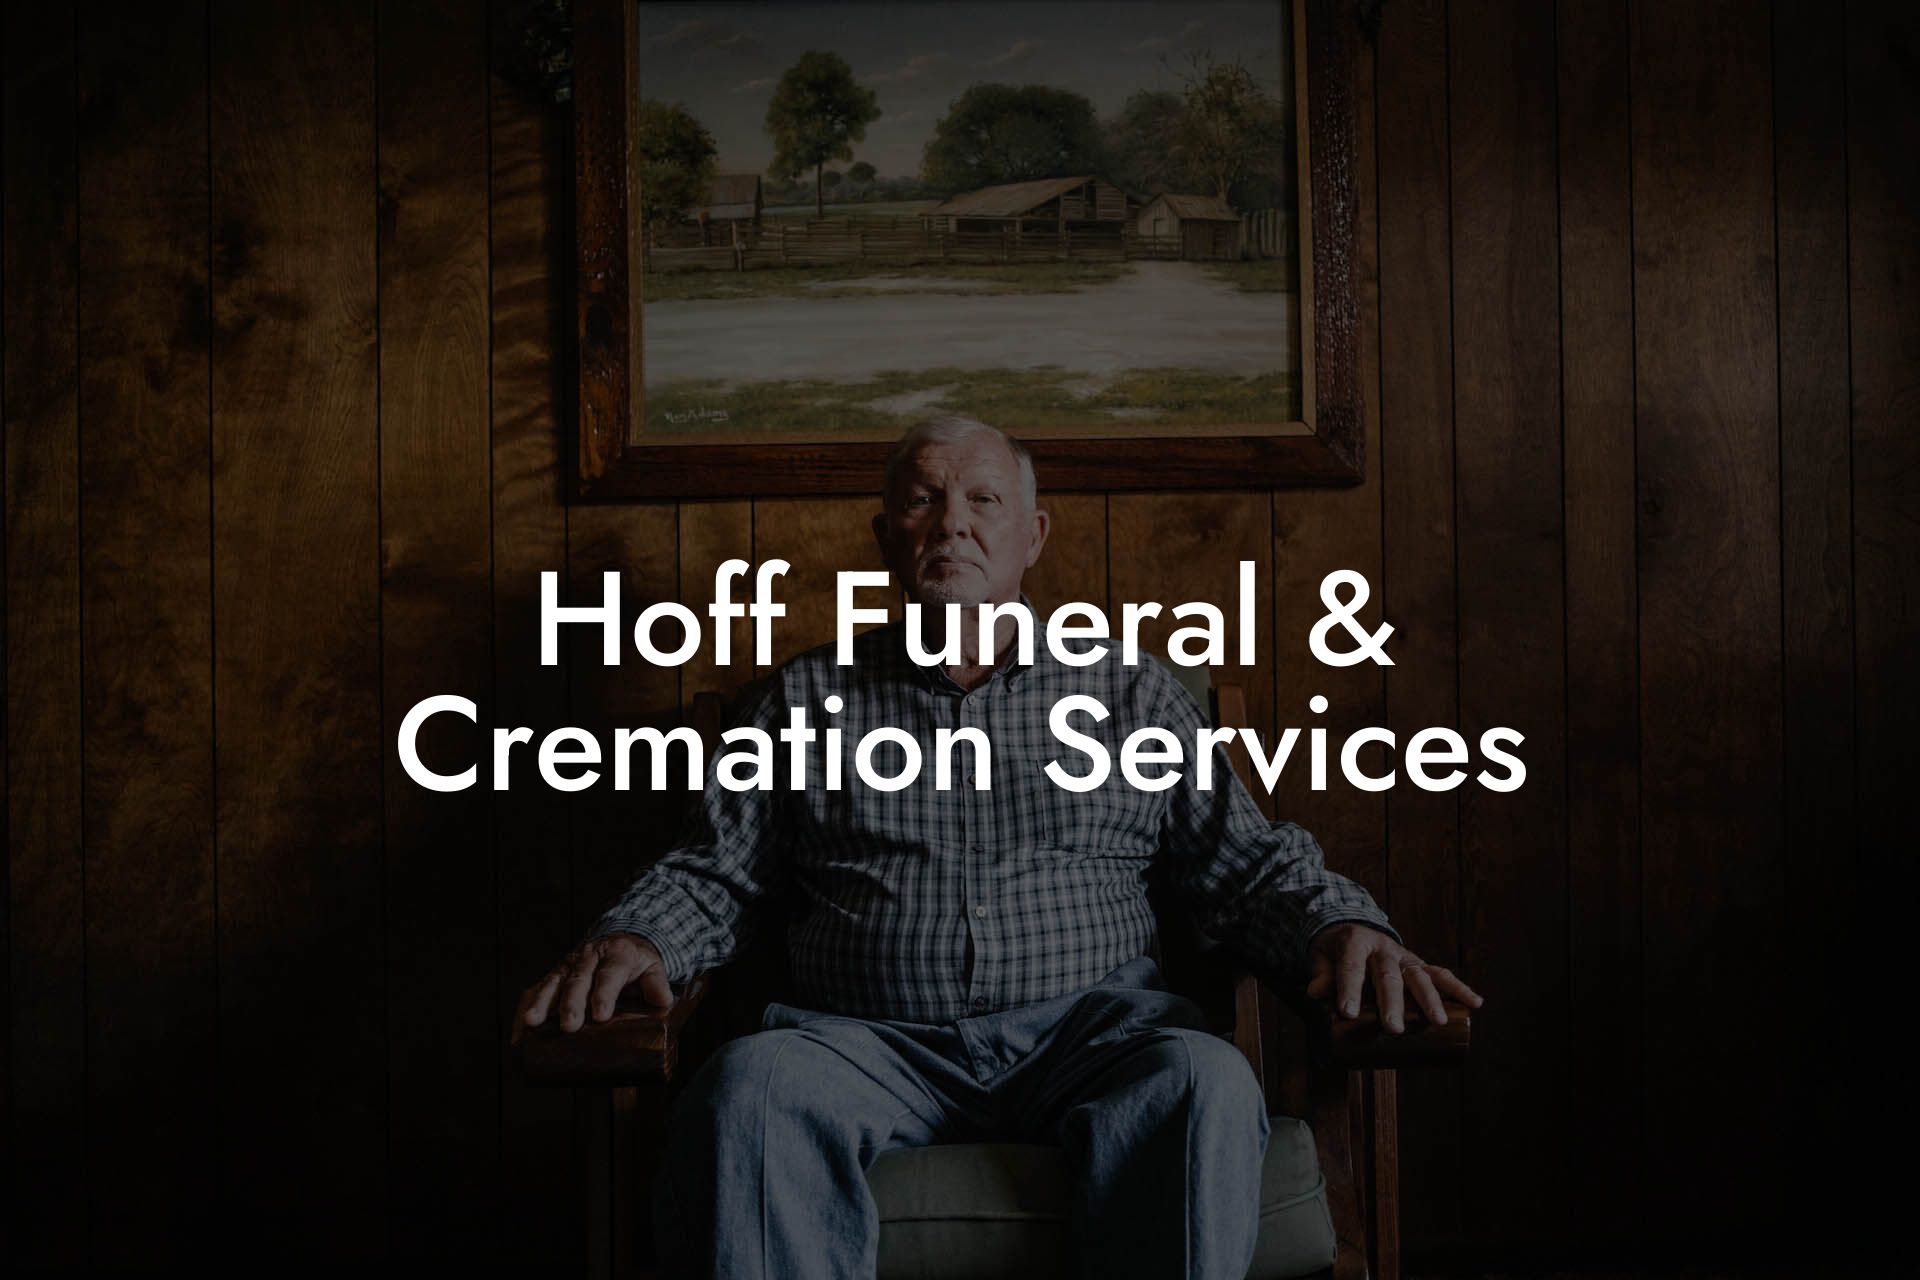 Hoff Funeral & Cremation Services